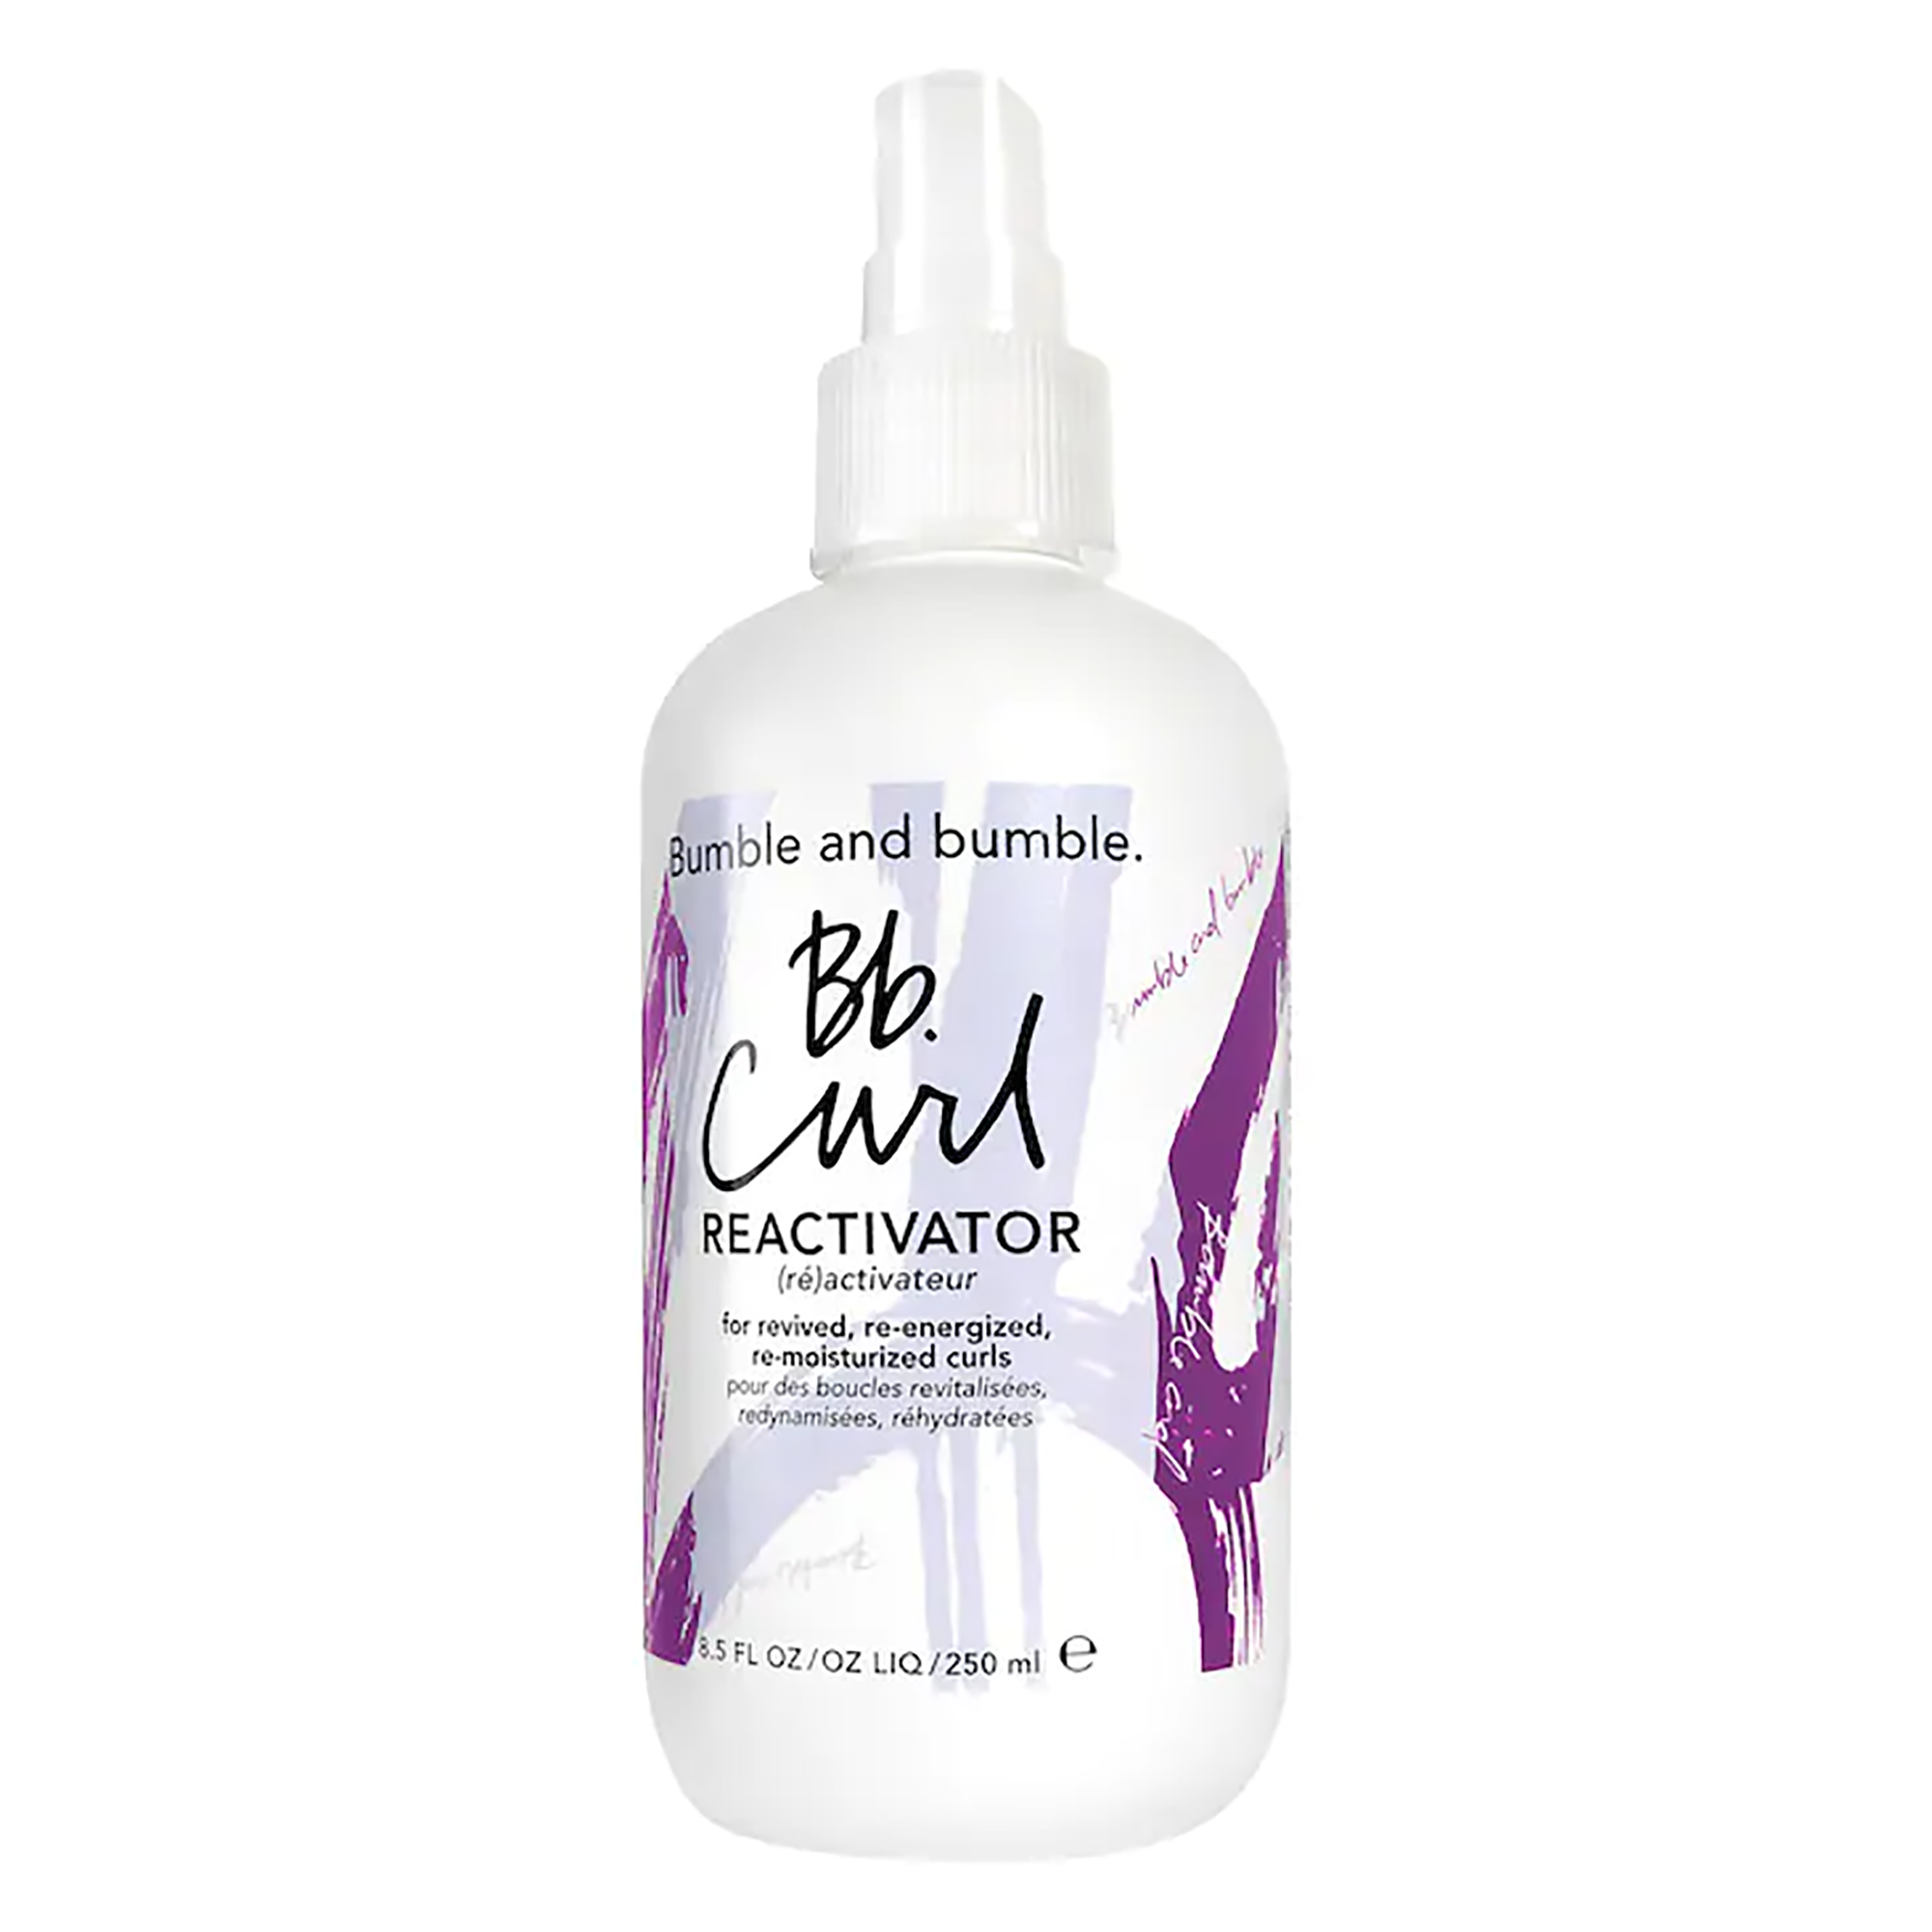 Bumble and Bumble Curl Re-activator / 8.5OZ